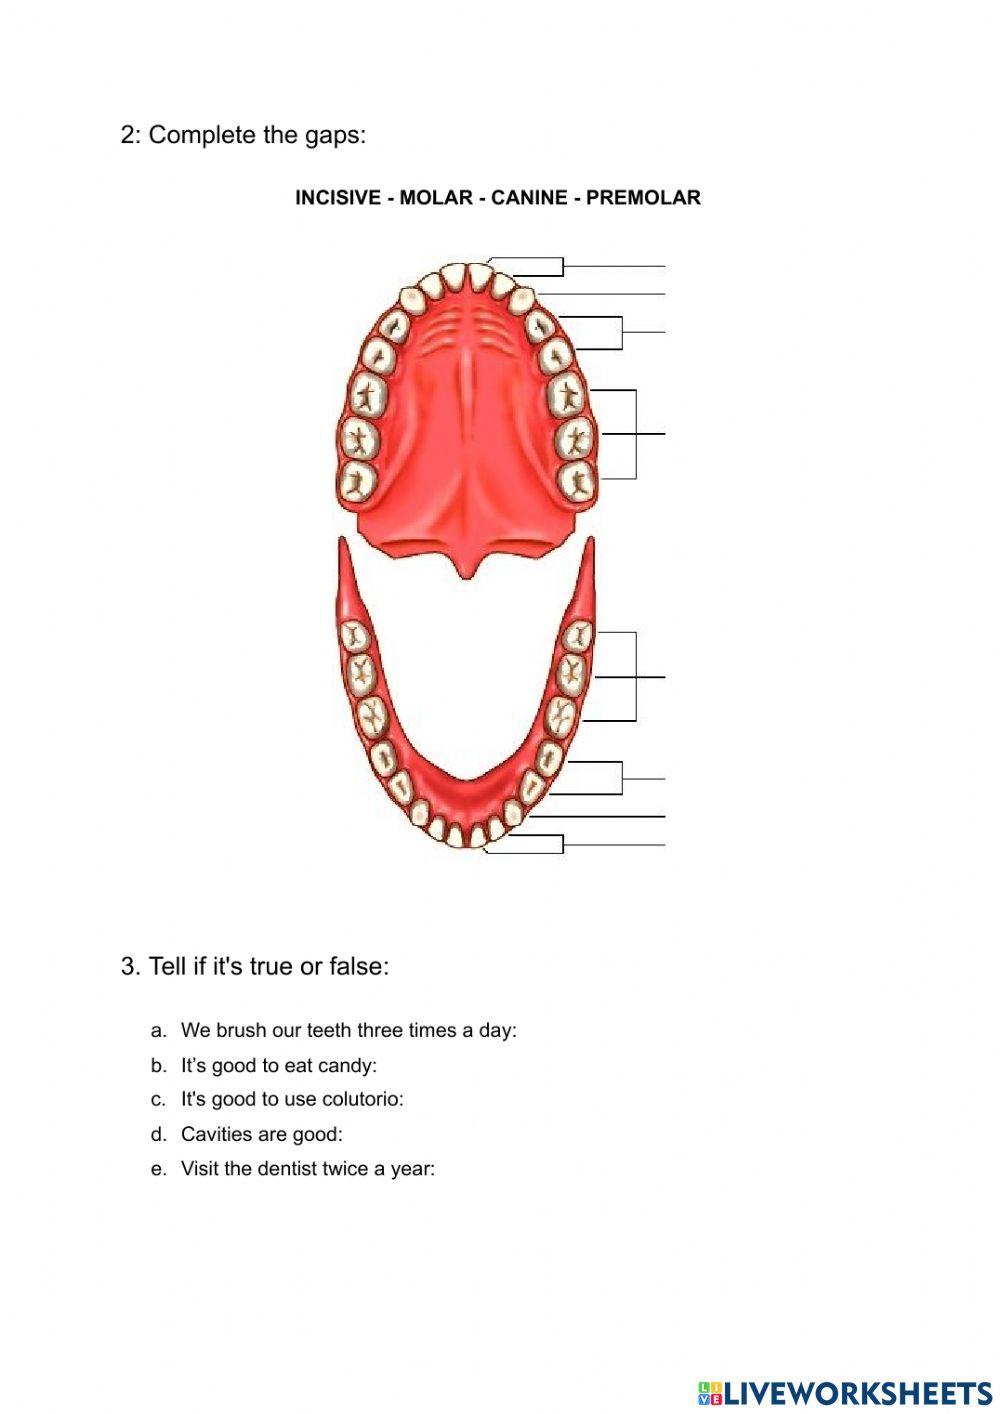 Oral cavity exercises